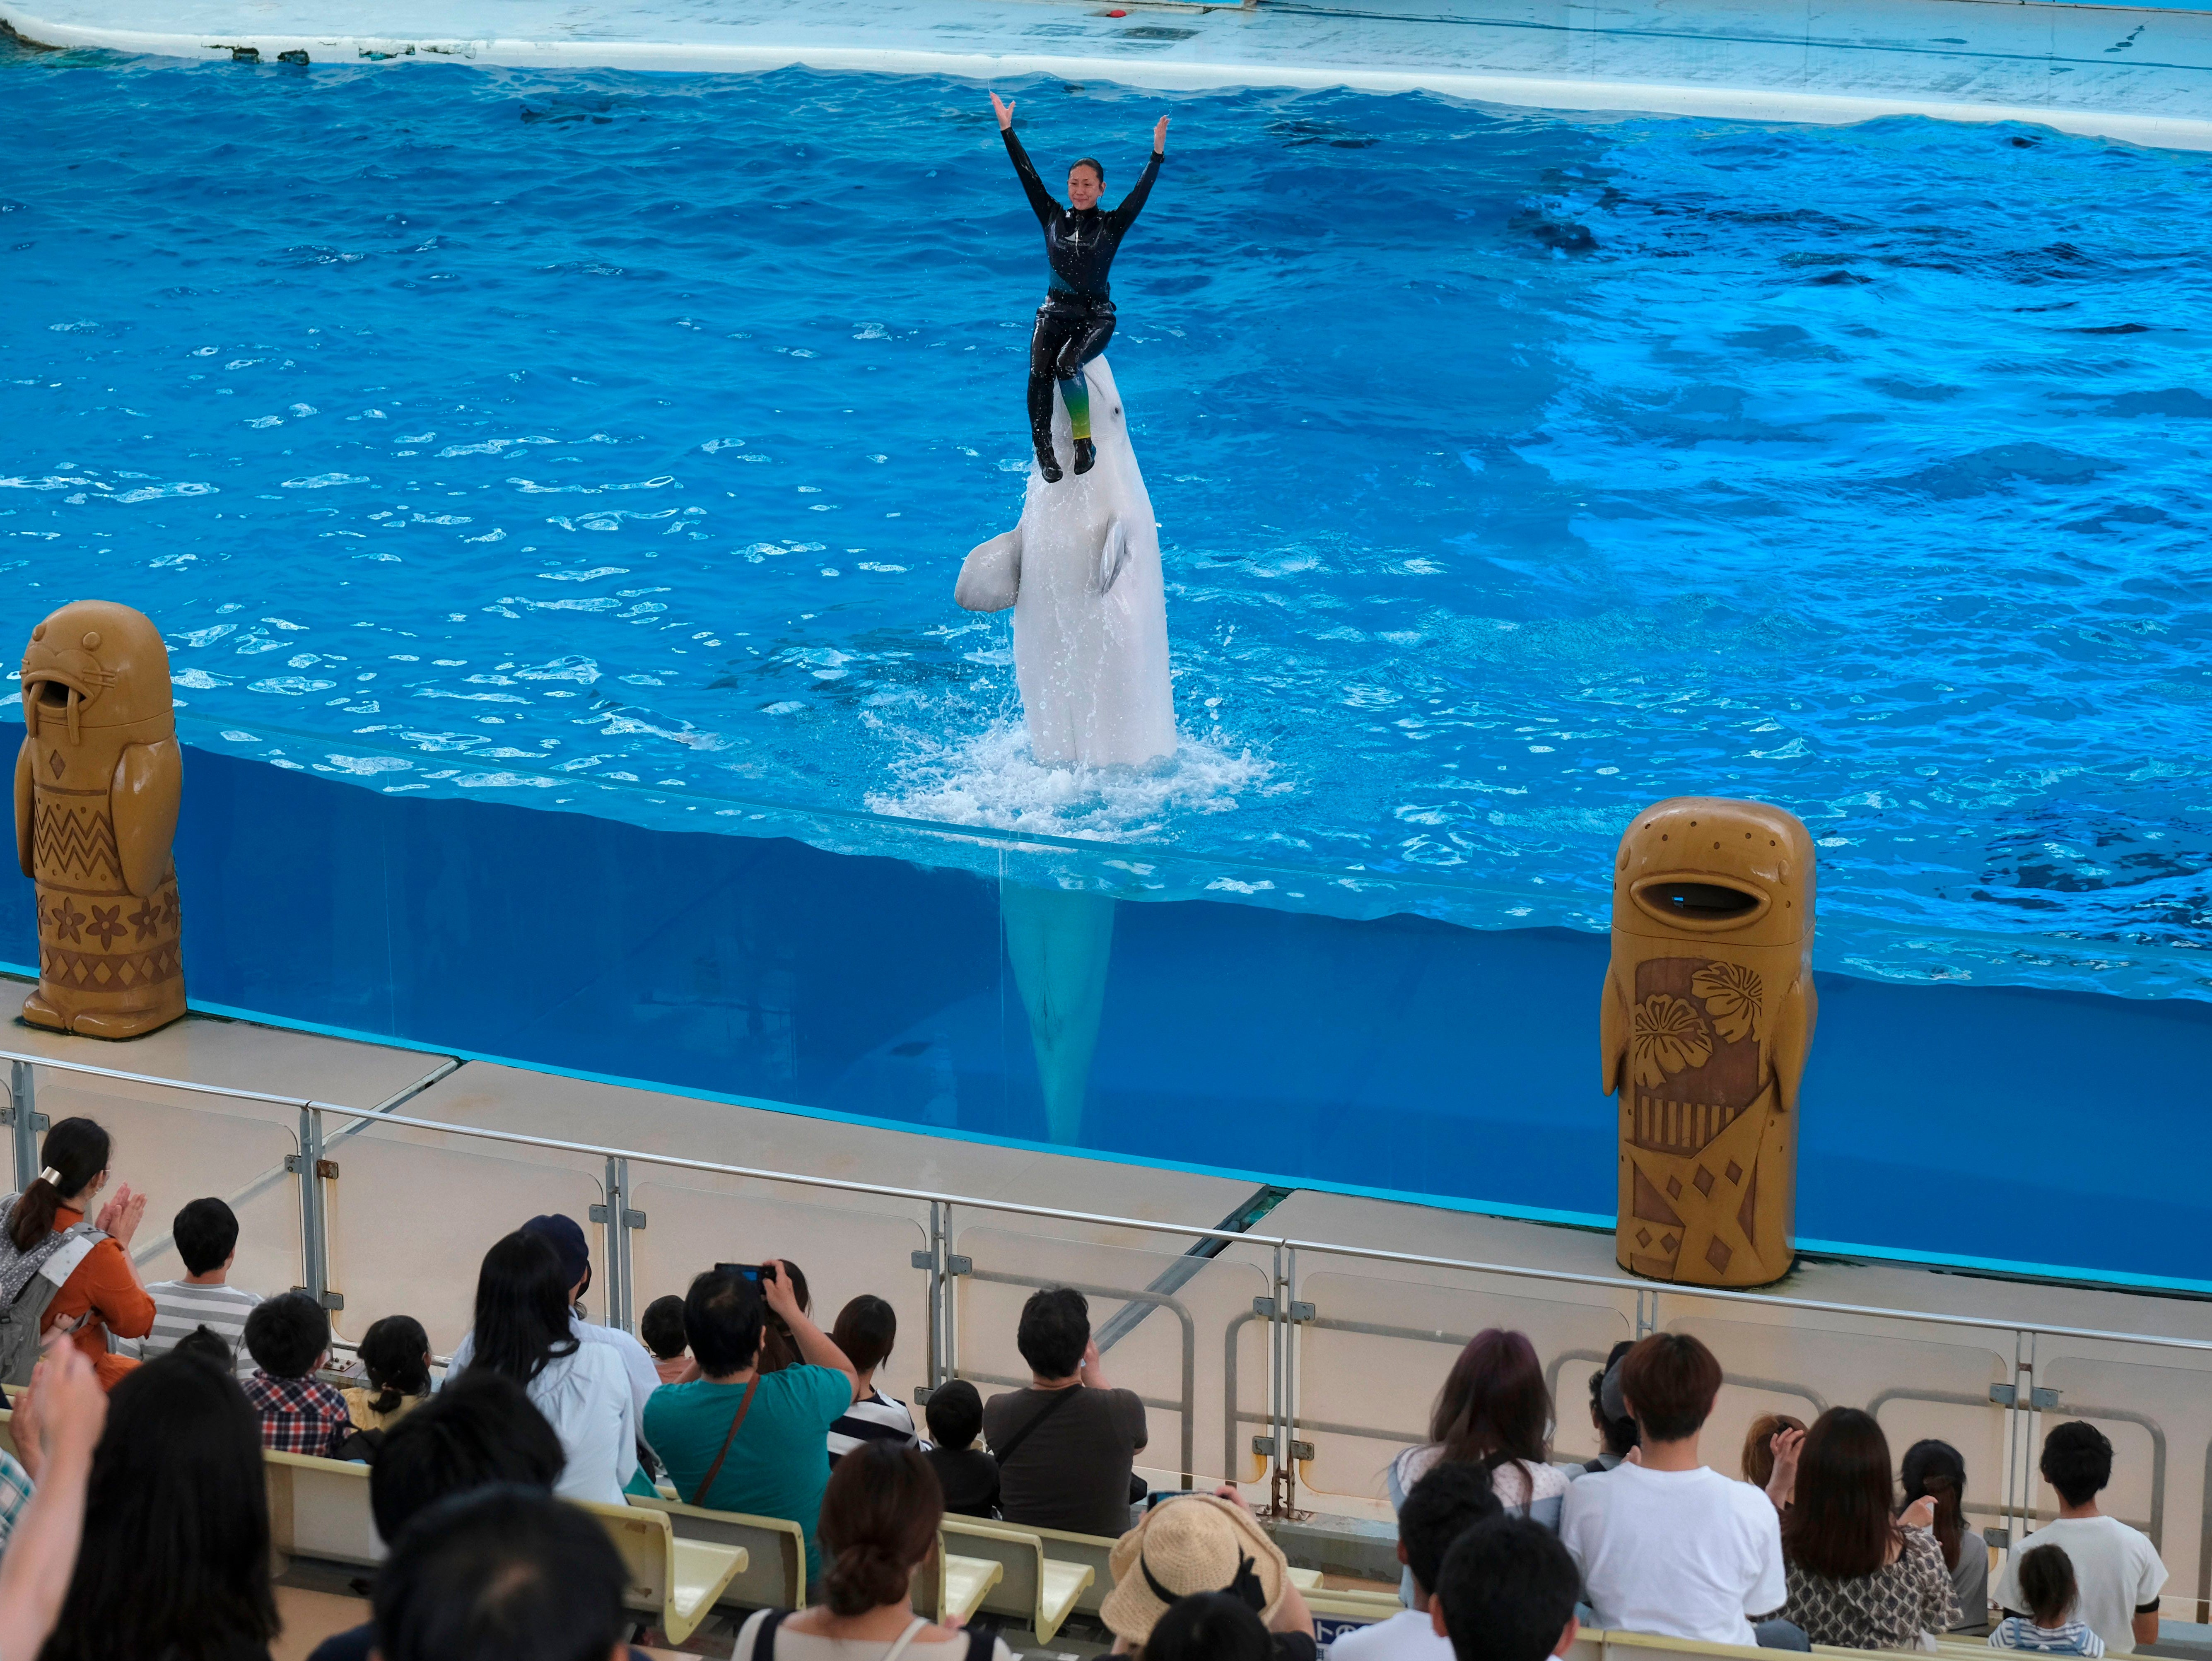 Parks that keep whales such as white belugas and dolphins cannot cater for their complex needs, the TV star says